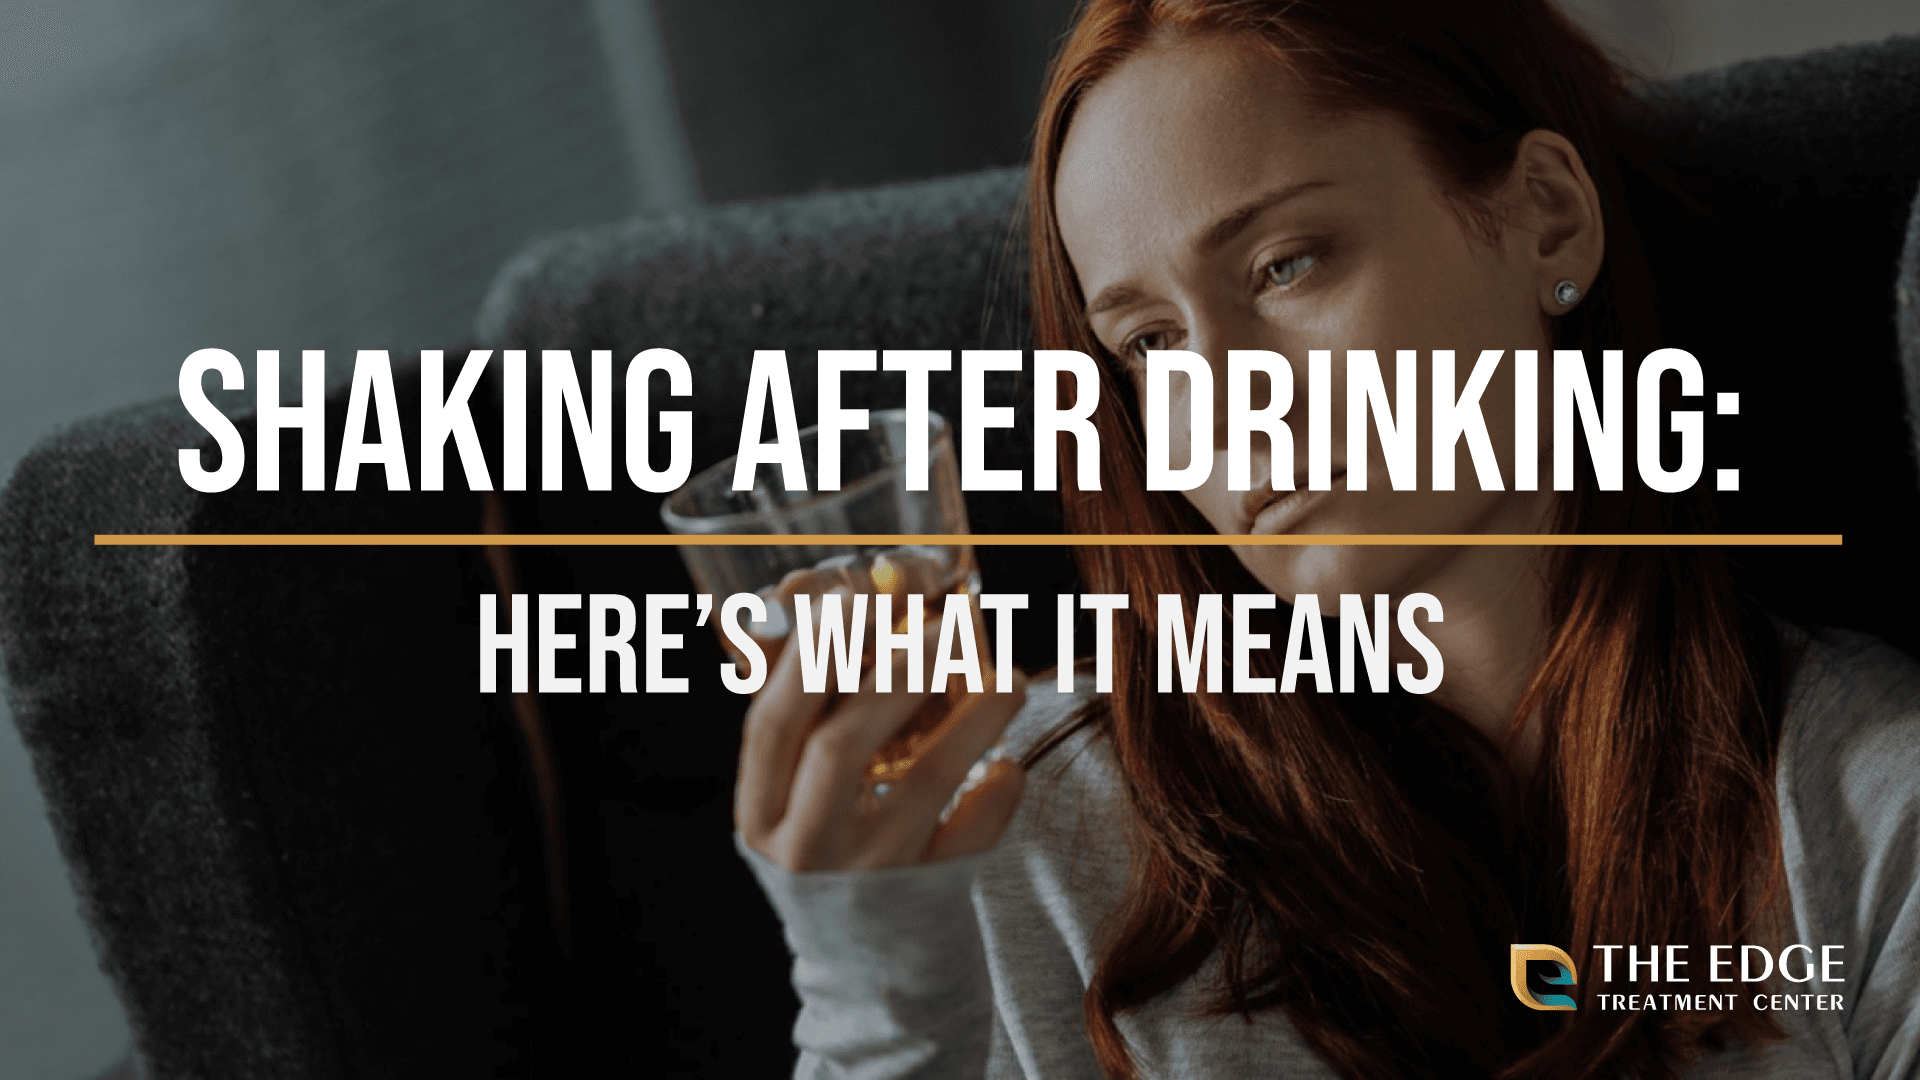 What Does Shaking After Drinking Mean?